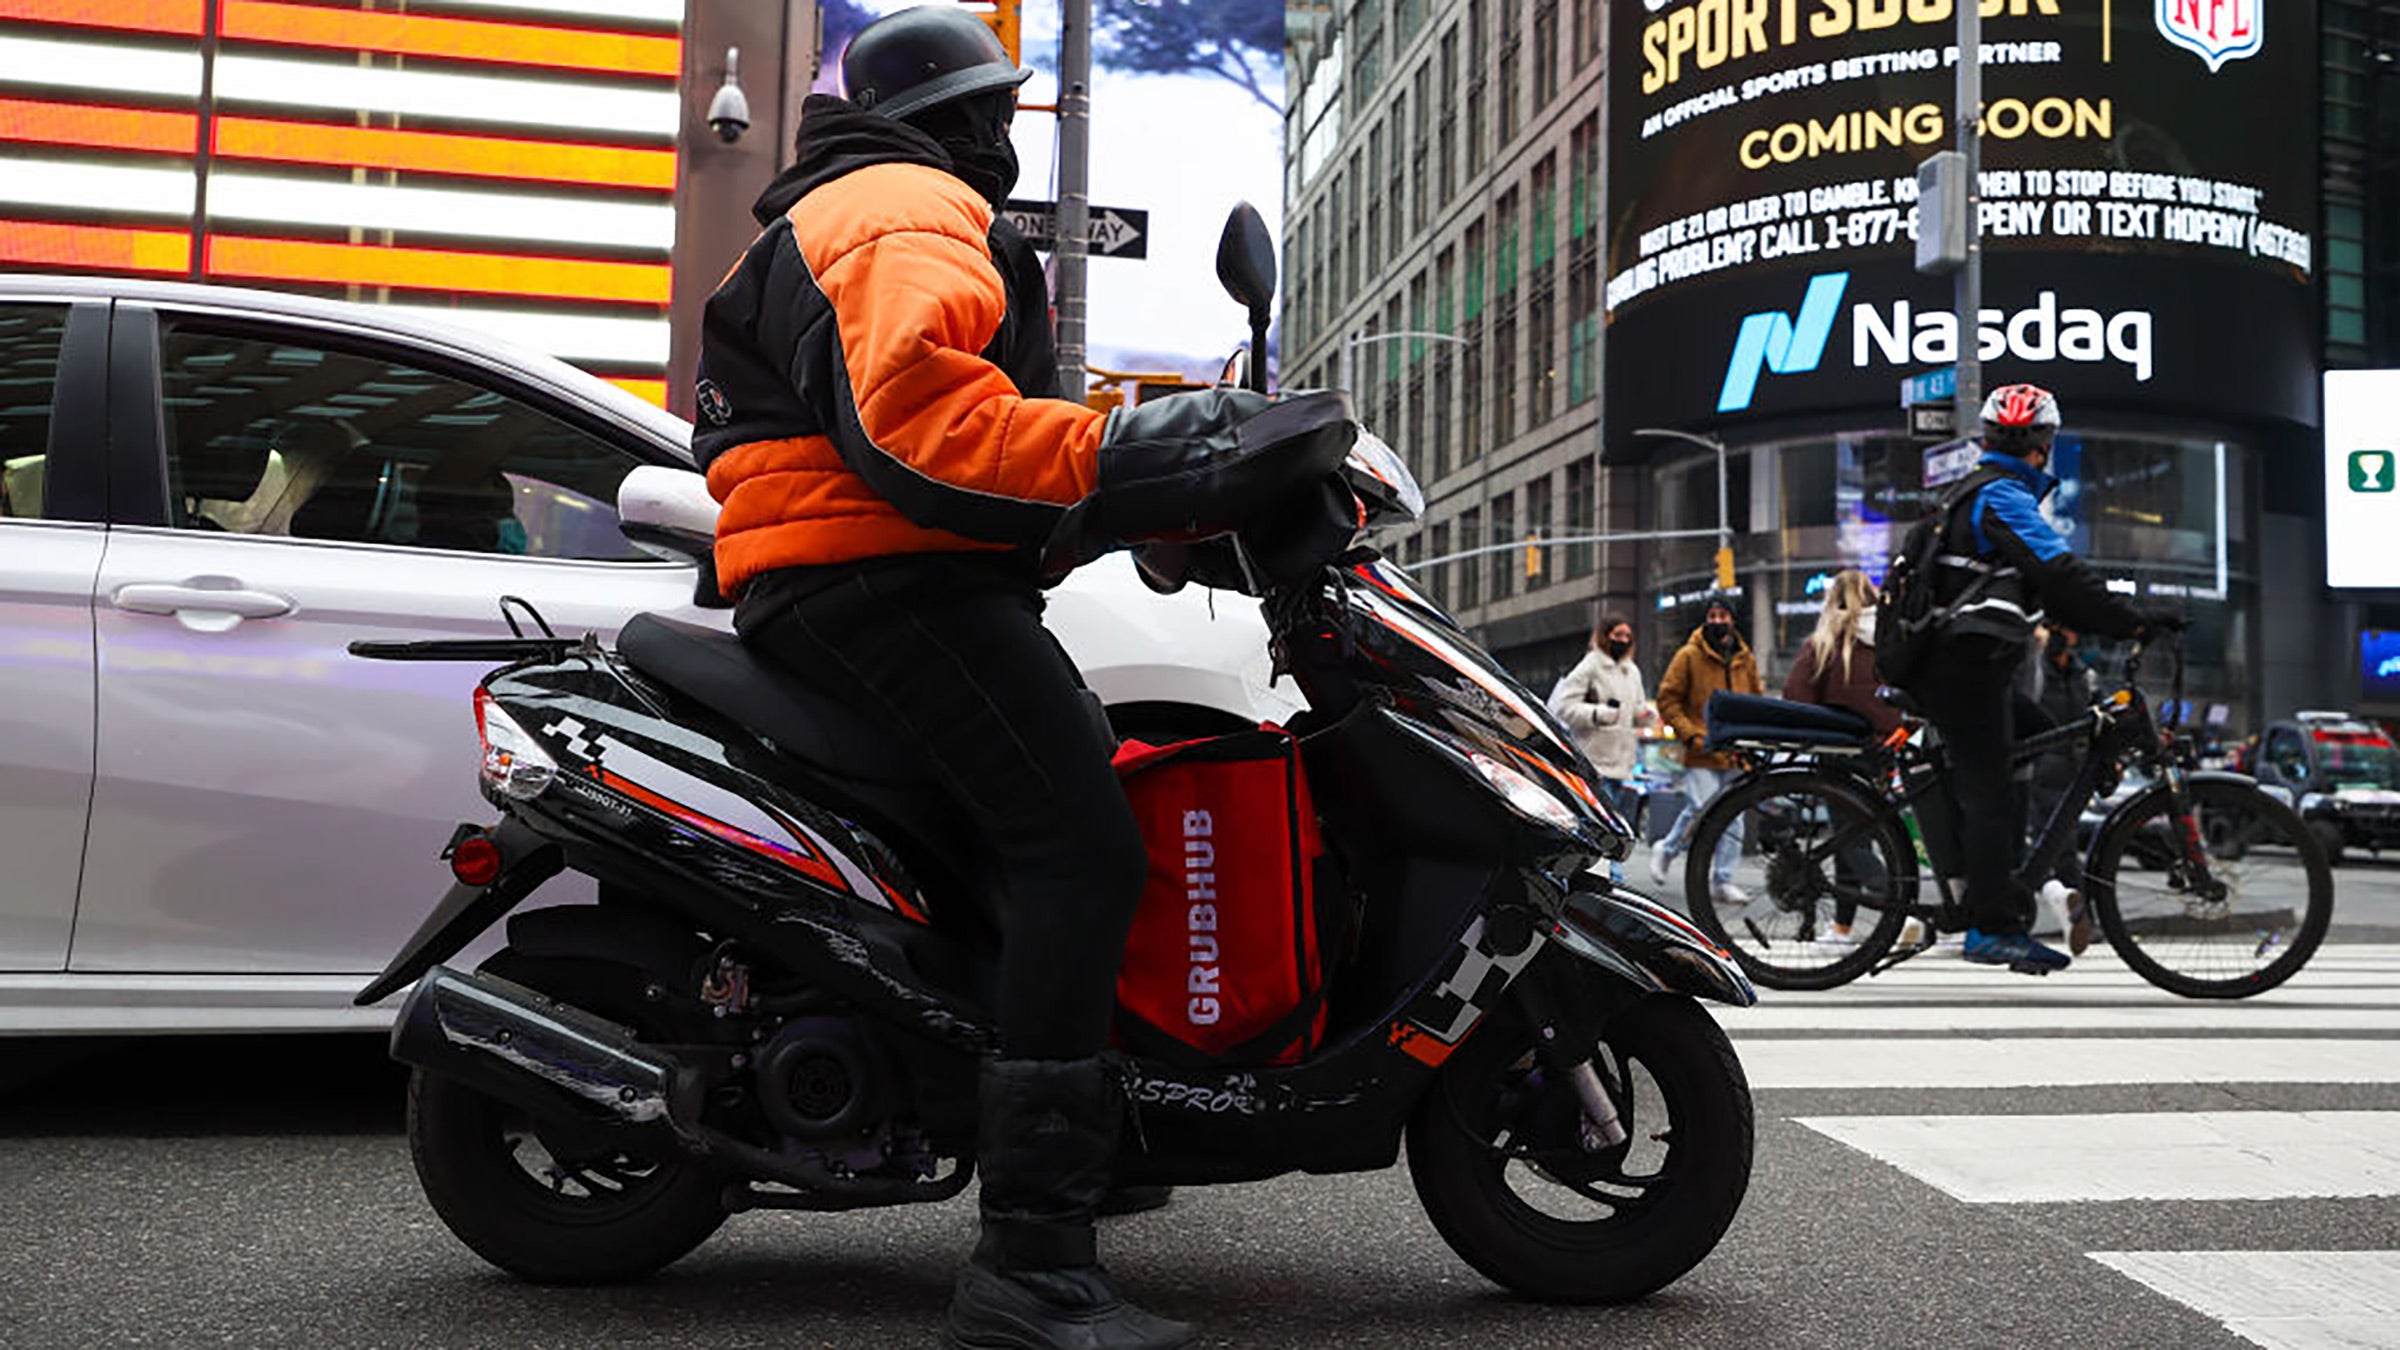 Motorized Scooters Are Taking Over New York City's Bike Lanes